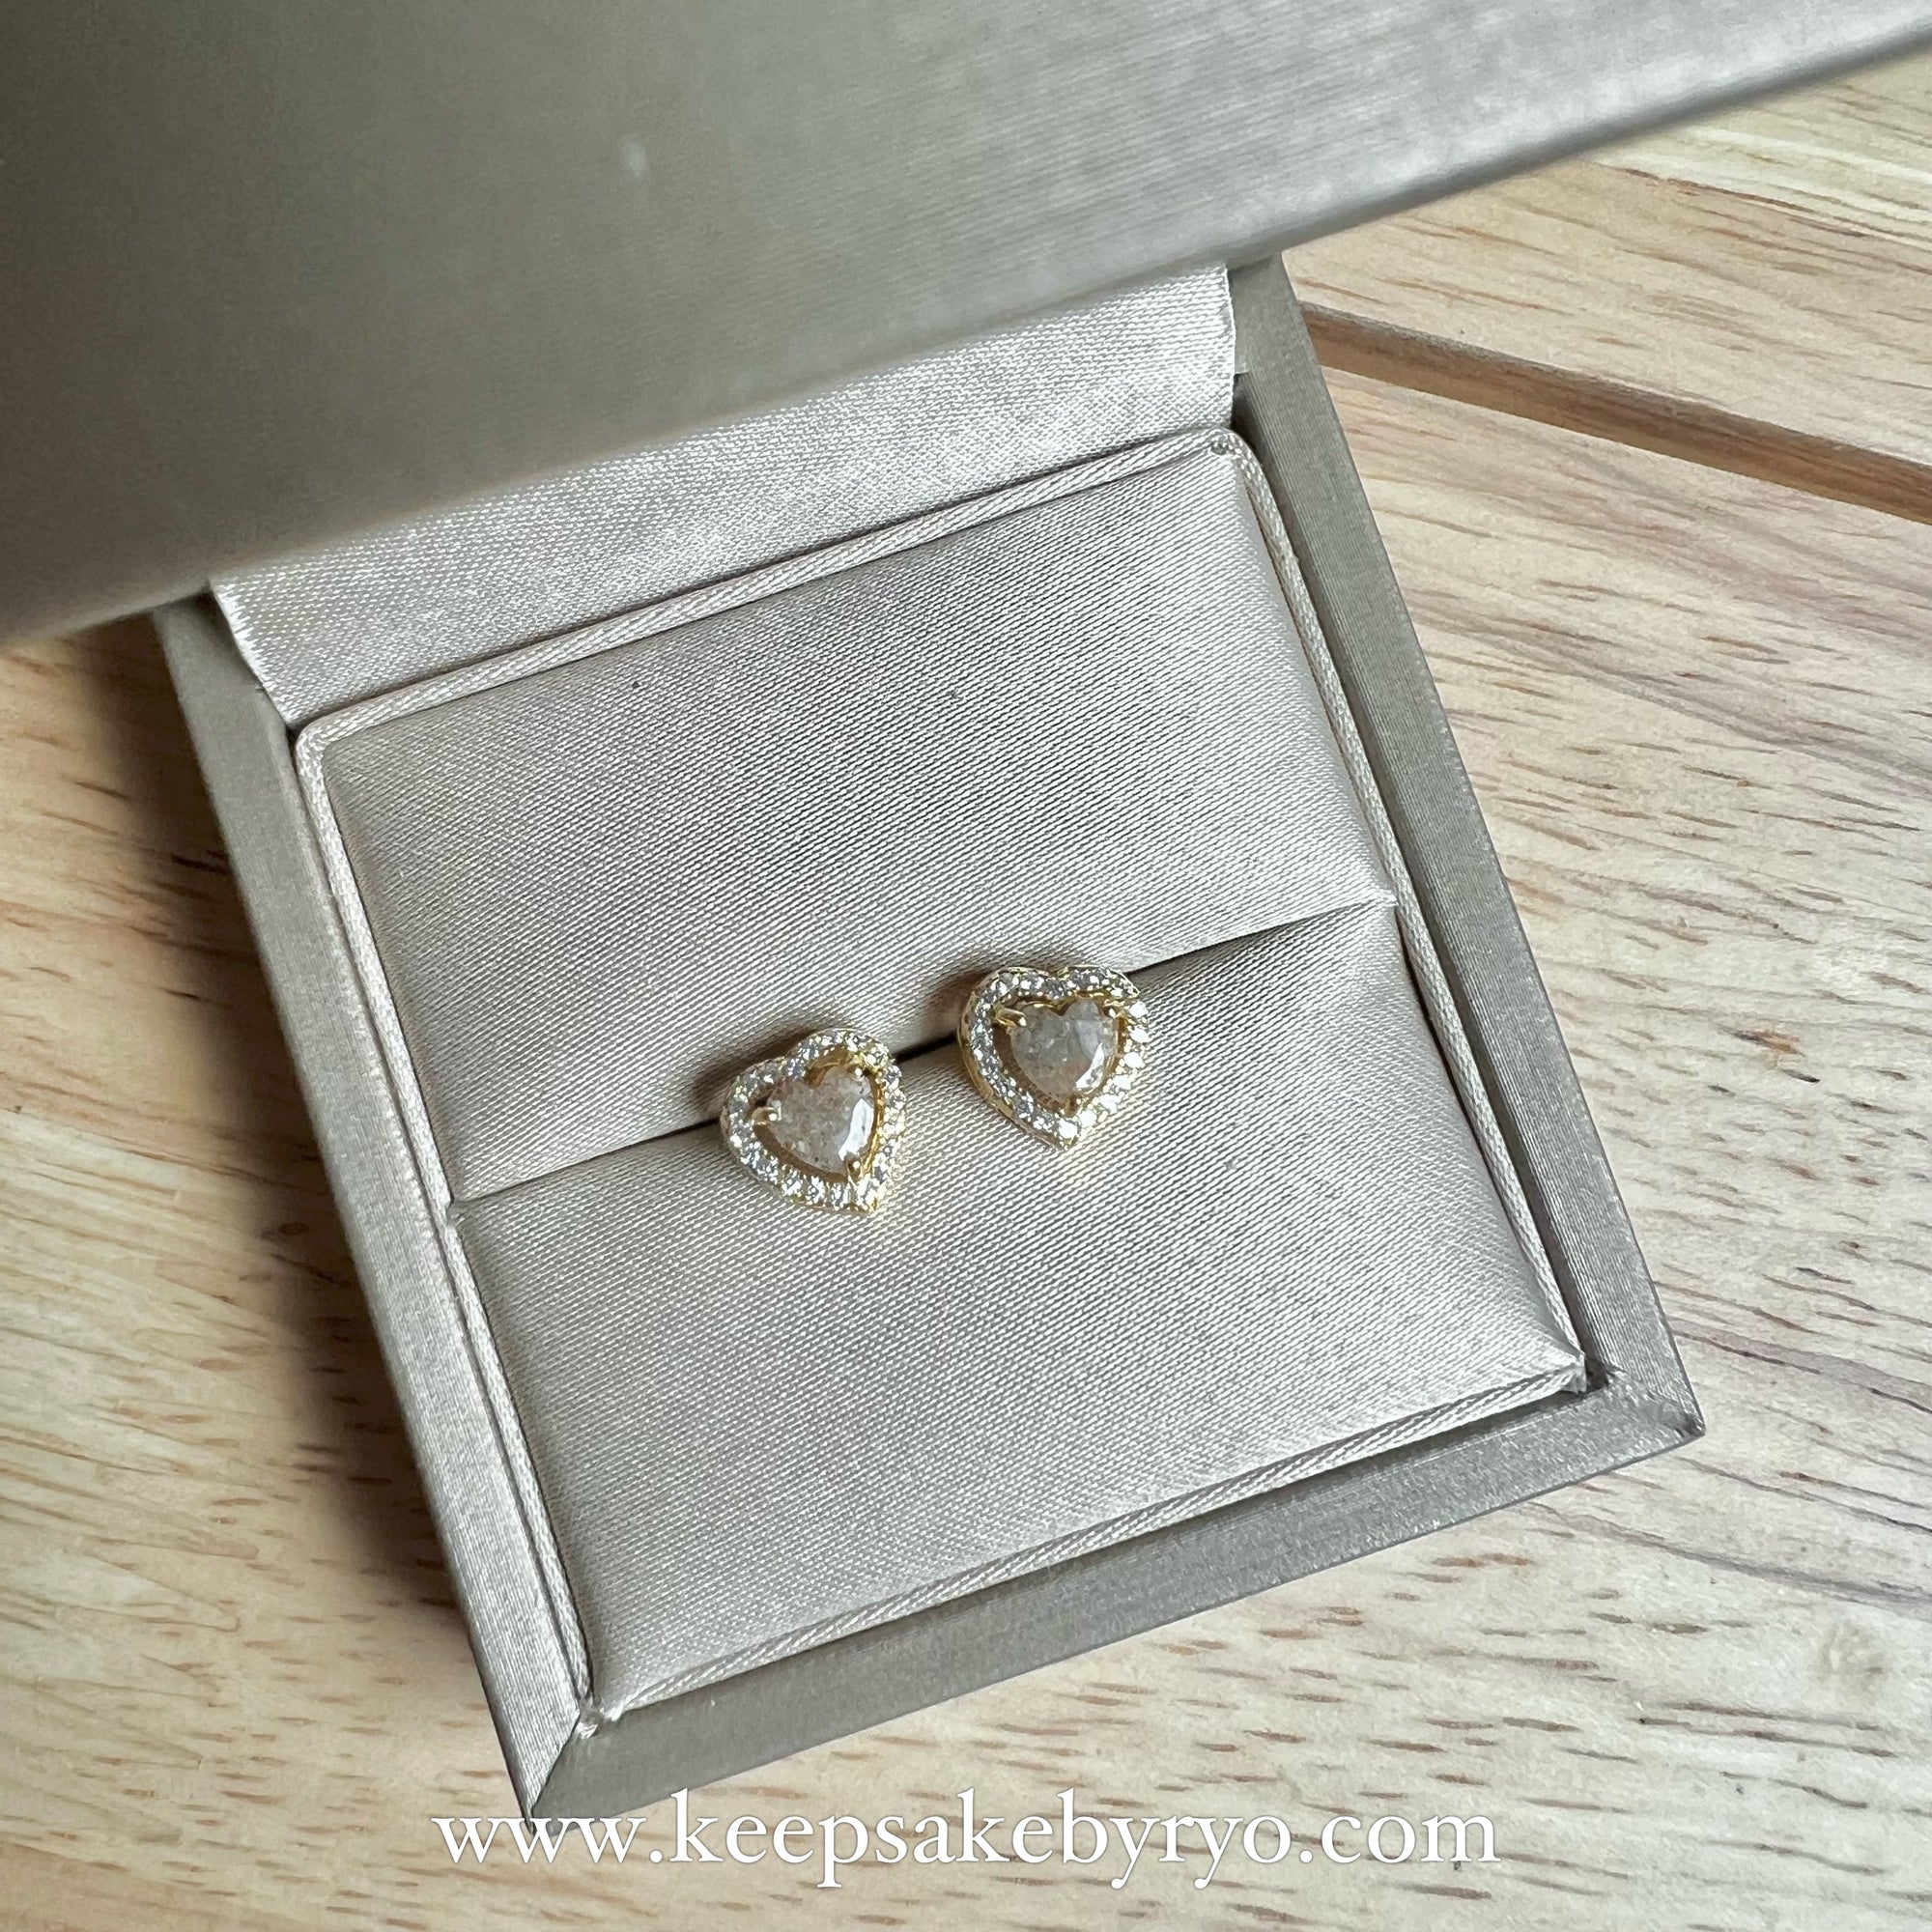 ASHES SOLITAIRE 18K GOLD: GEMMA PAVE HEART STUD EARRINGS WITH HEART SHAPED INCLUSION STONE